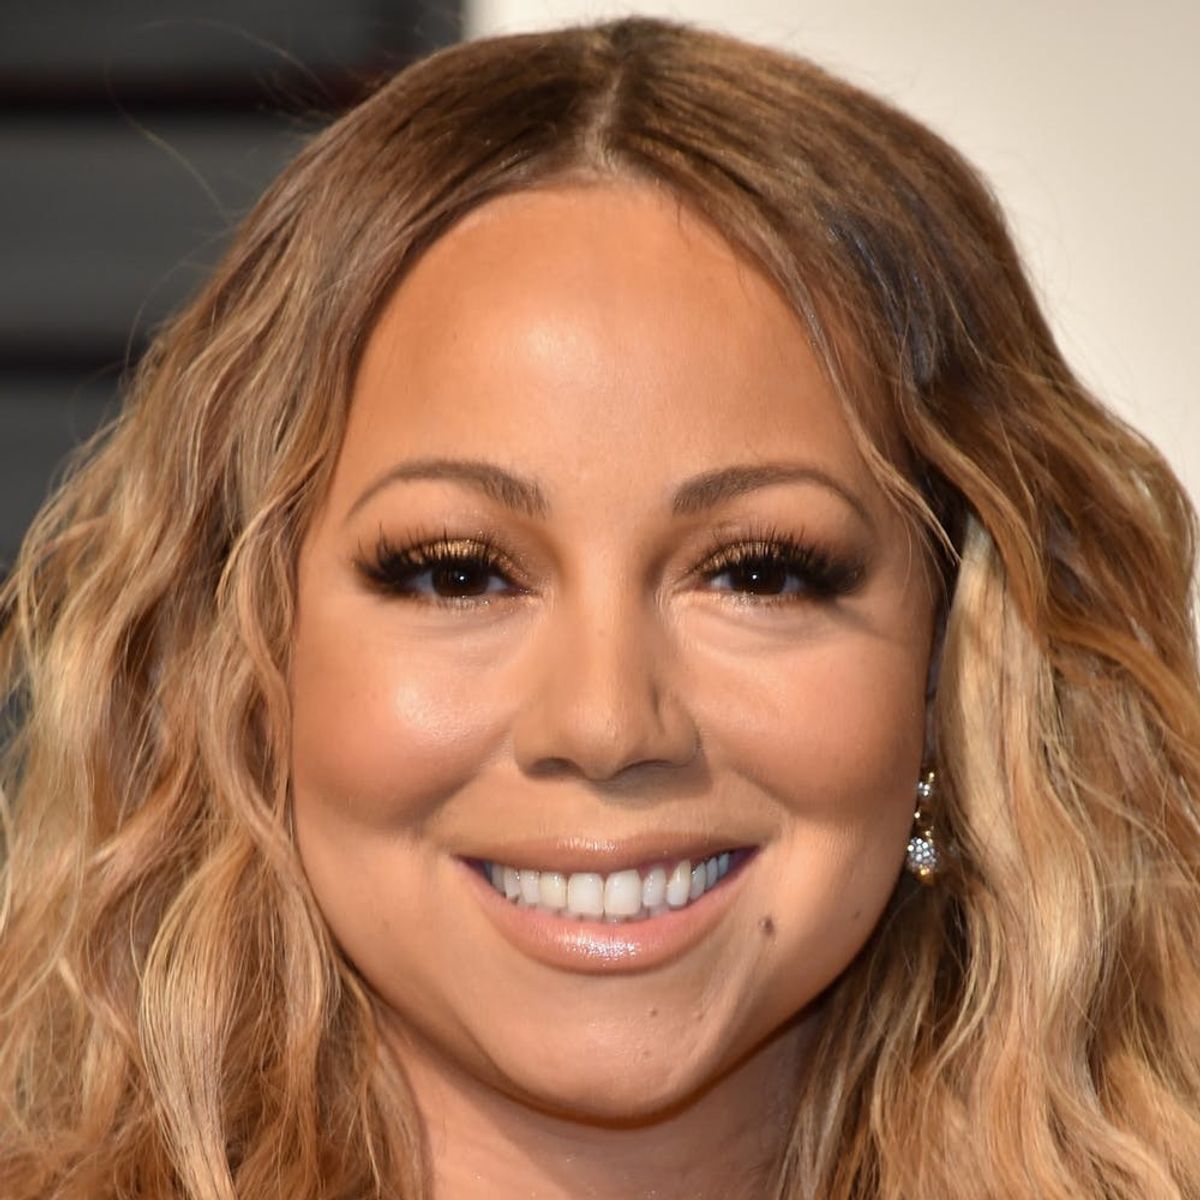 Mariah Carey Is Prepping to Be the Next Big Celeb Beauty Mogul With Her Very Own Store